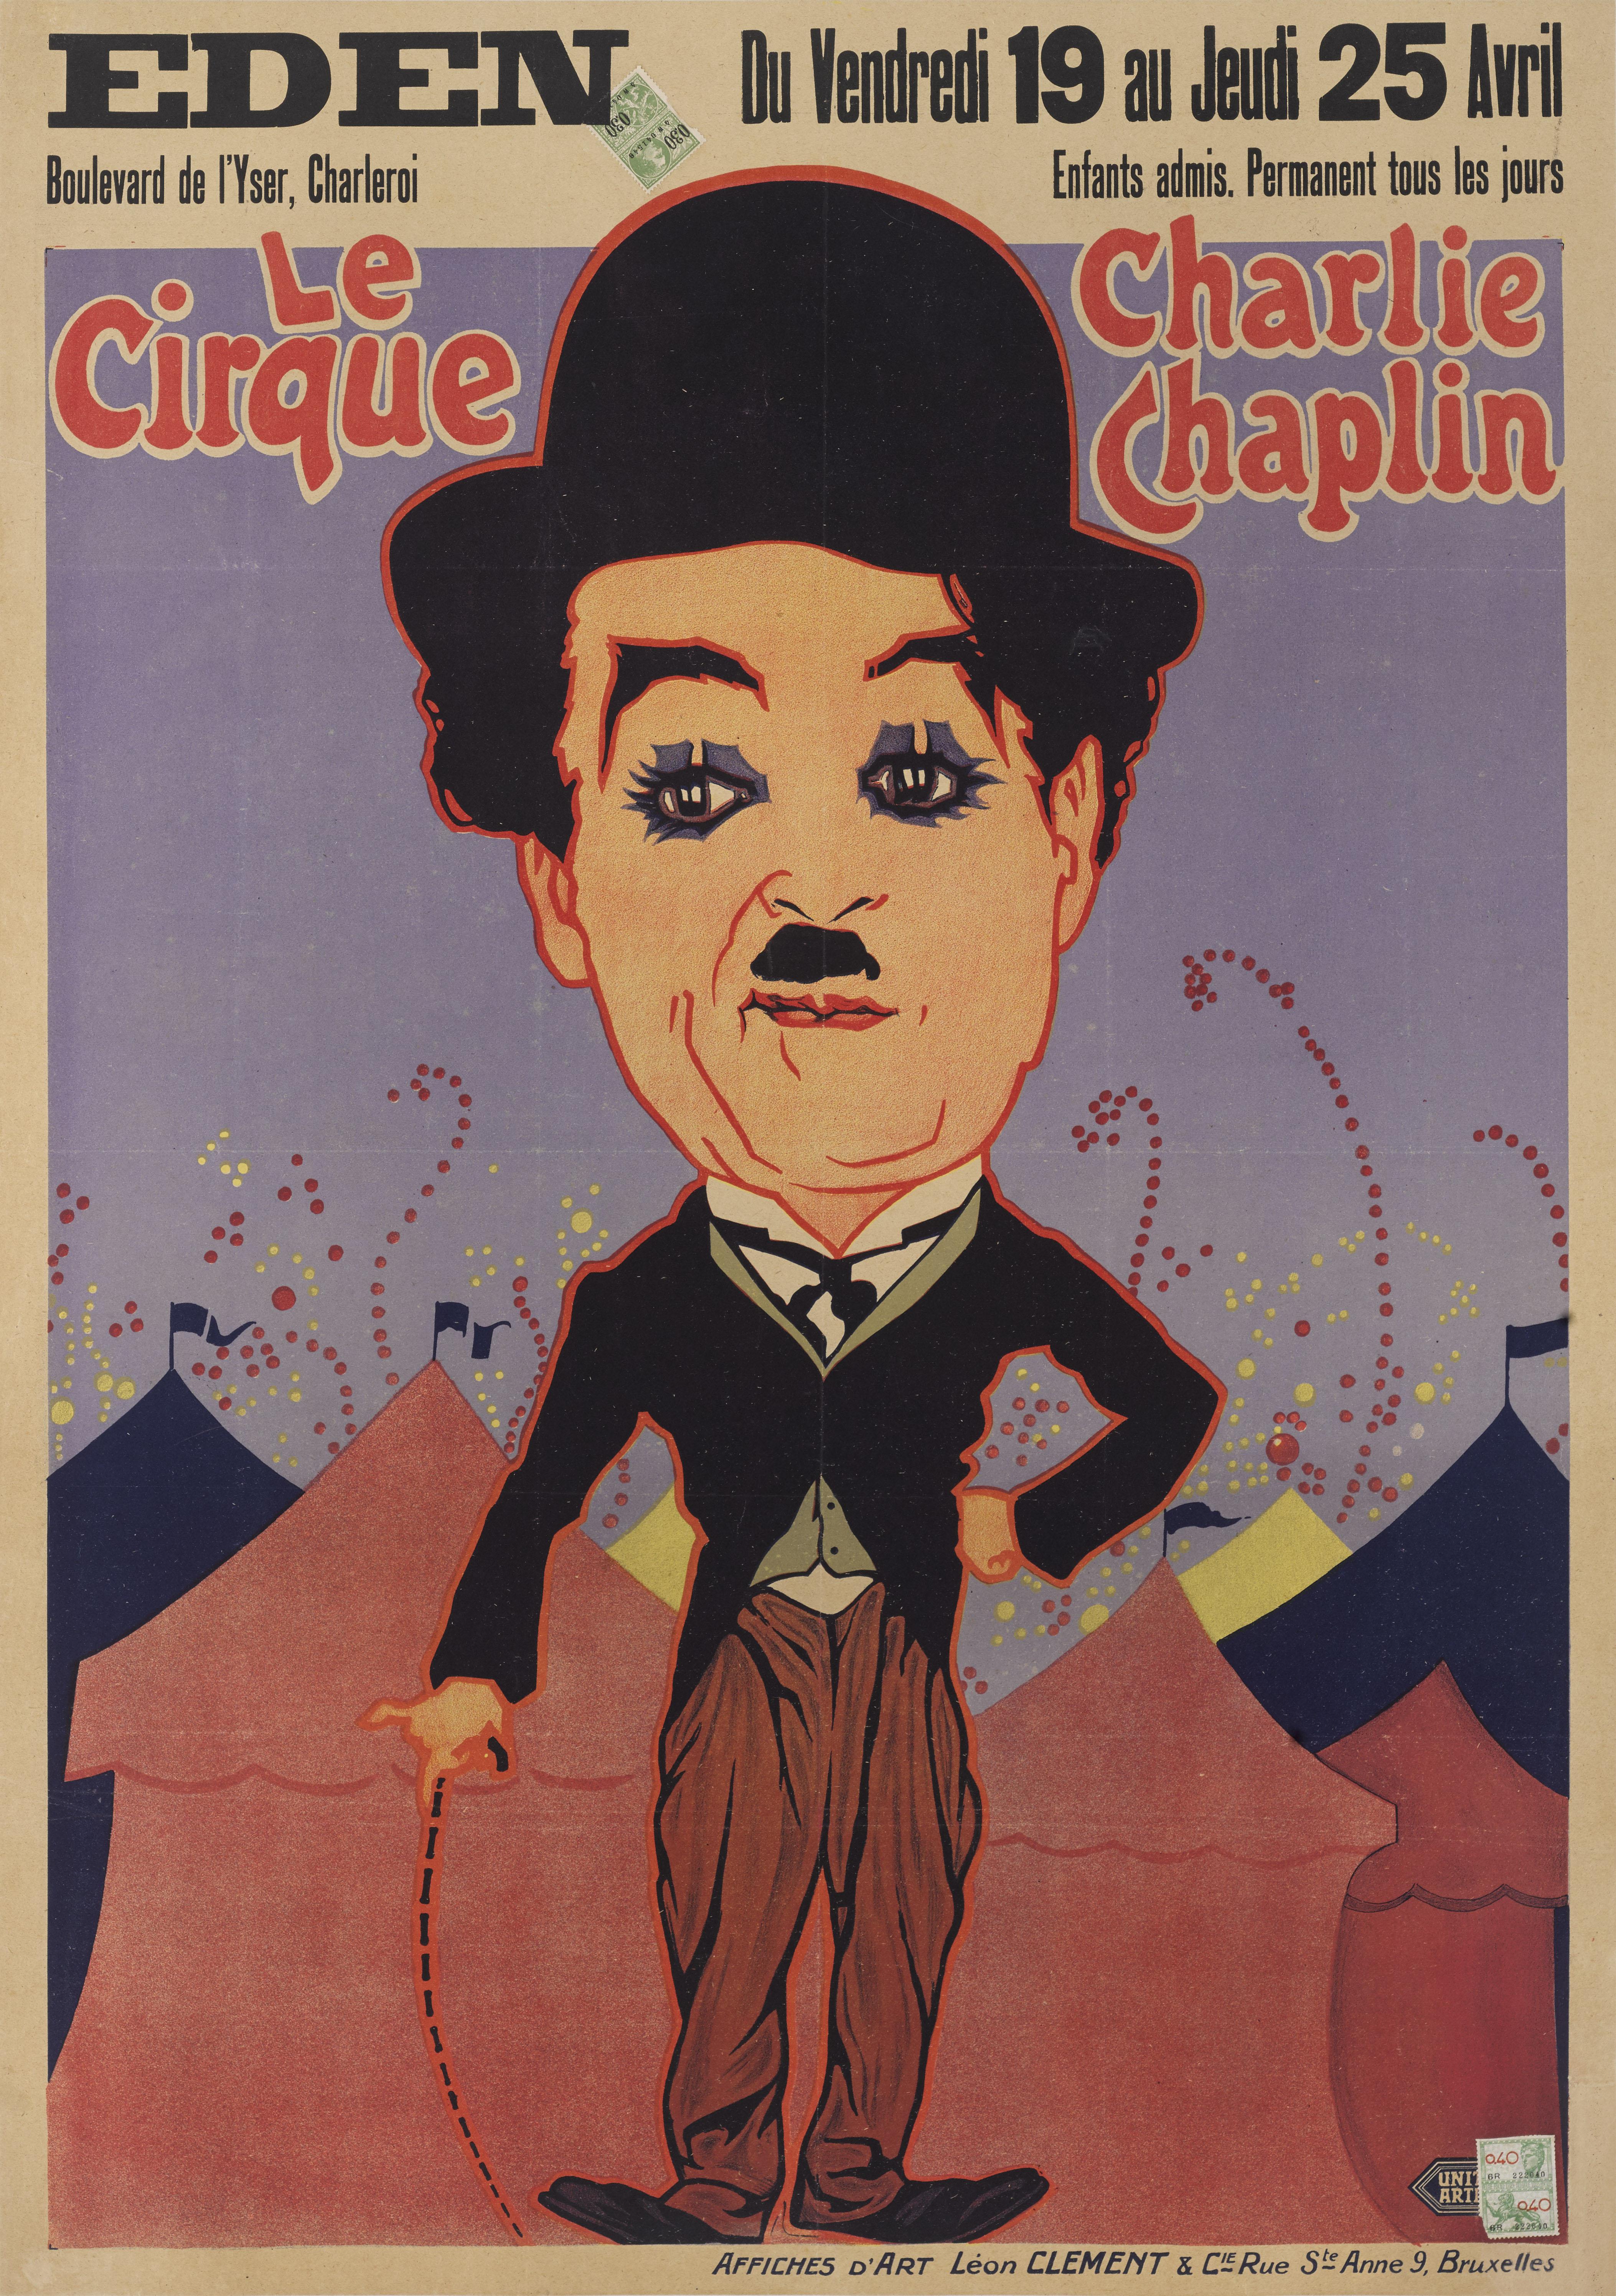 Original Belgian film poster for The Circus 1928
This 1928 comedy was written, directed and stars Charlie Chaplin, who was at the height of his fame.
The artwork on this poster is by Alvan Cordell 'Hap' Hadley (1895-1976). Hap' Hadley was a